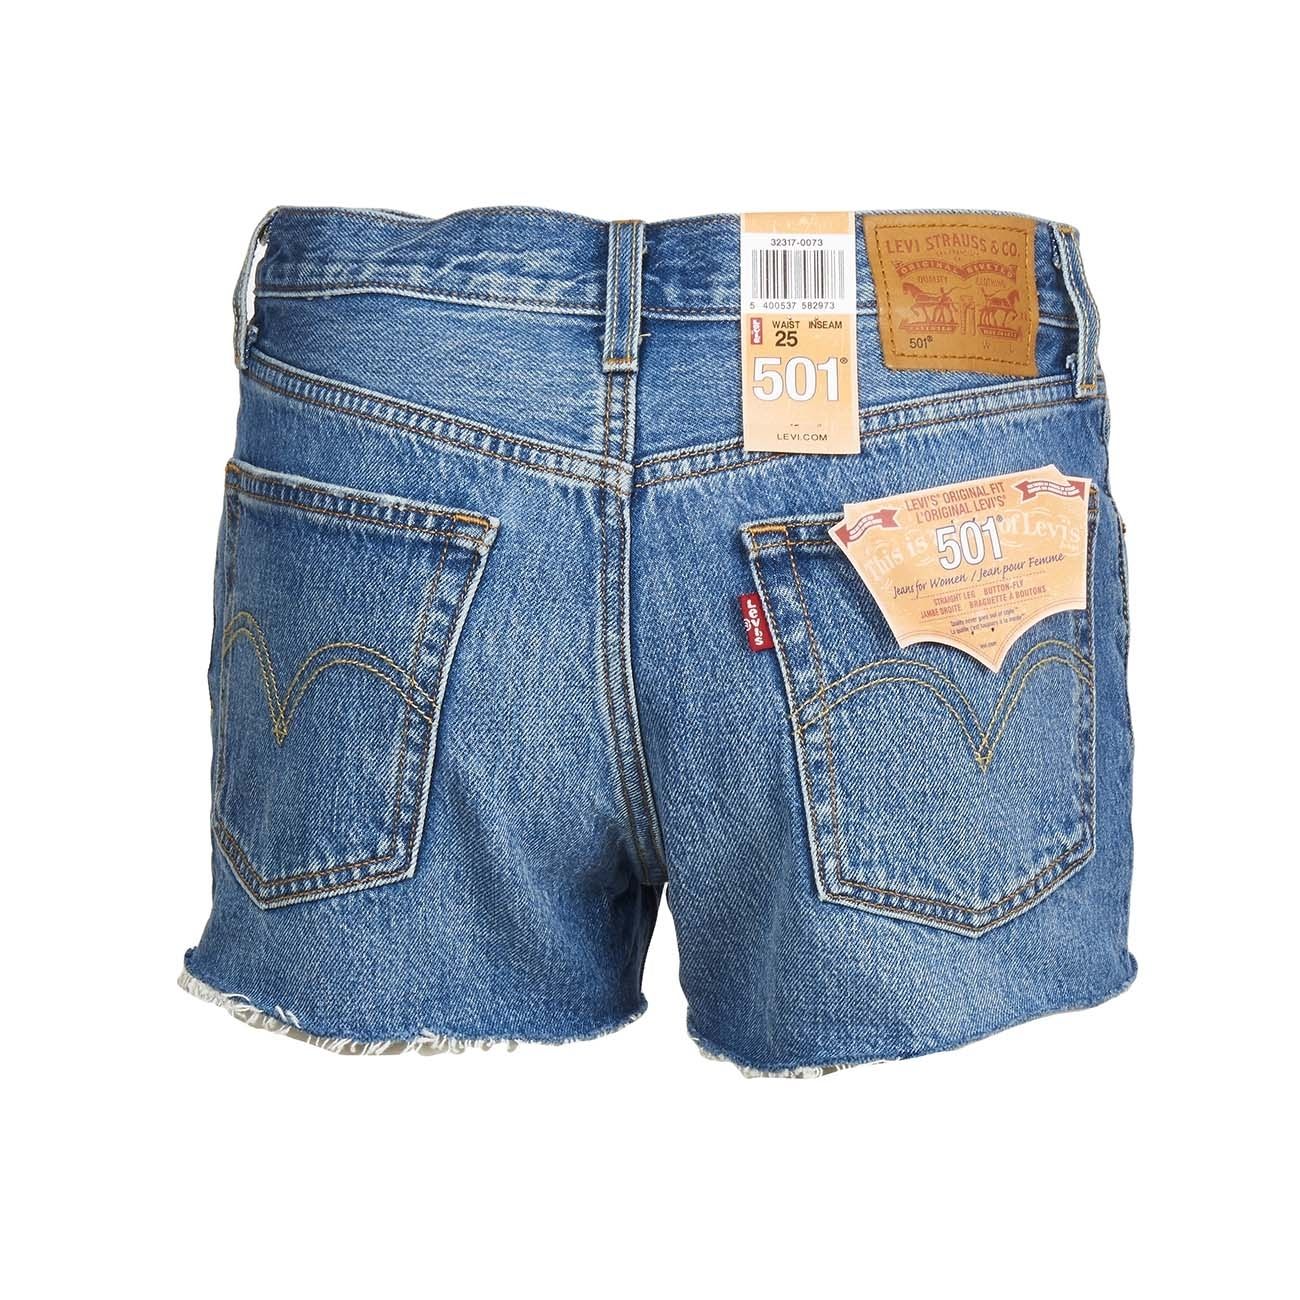 LEVIS SHORT JEANS 501 BACK TO YOUR 